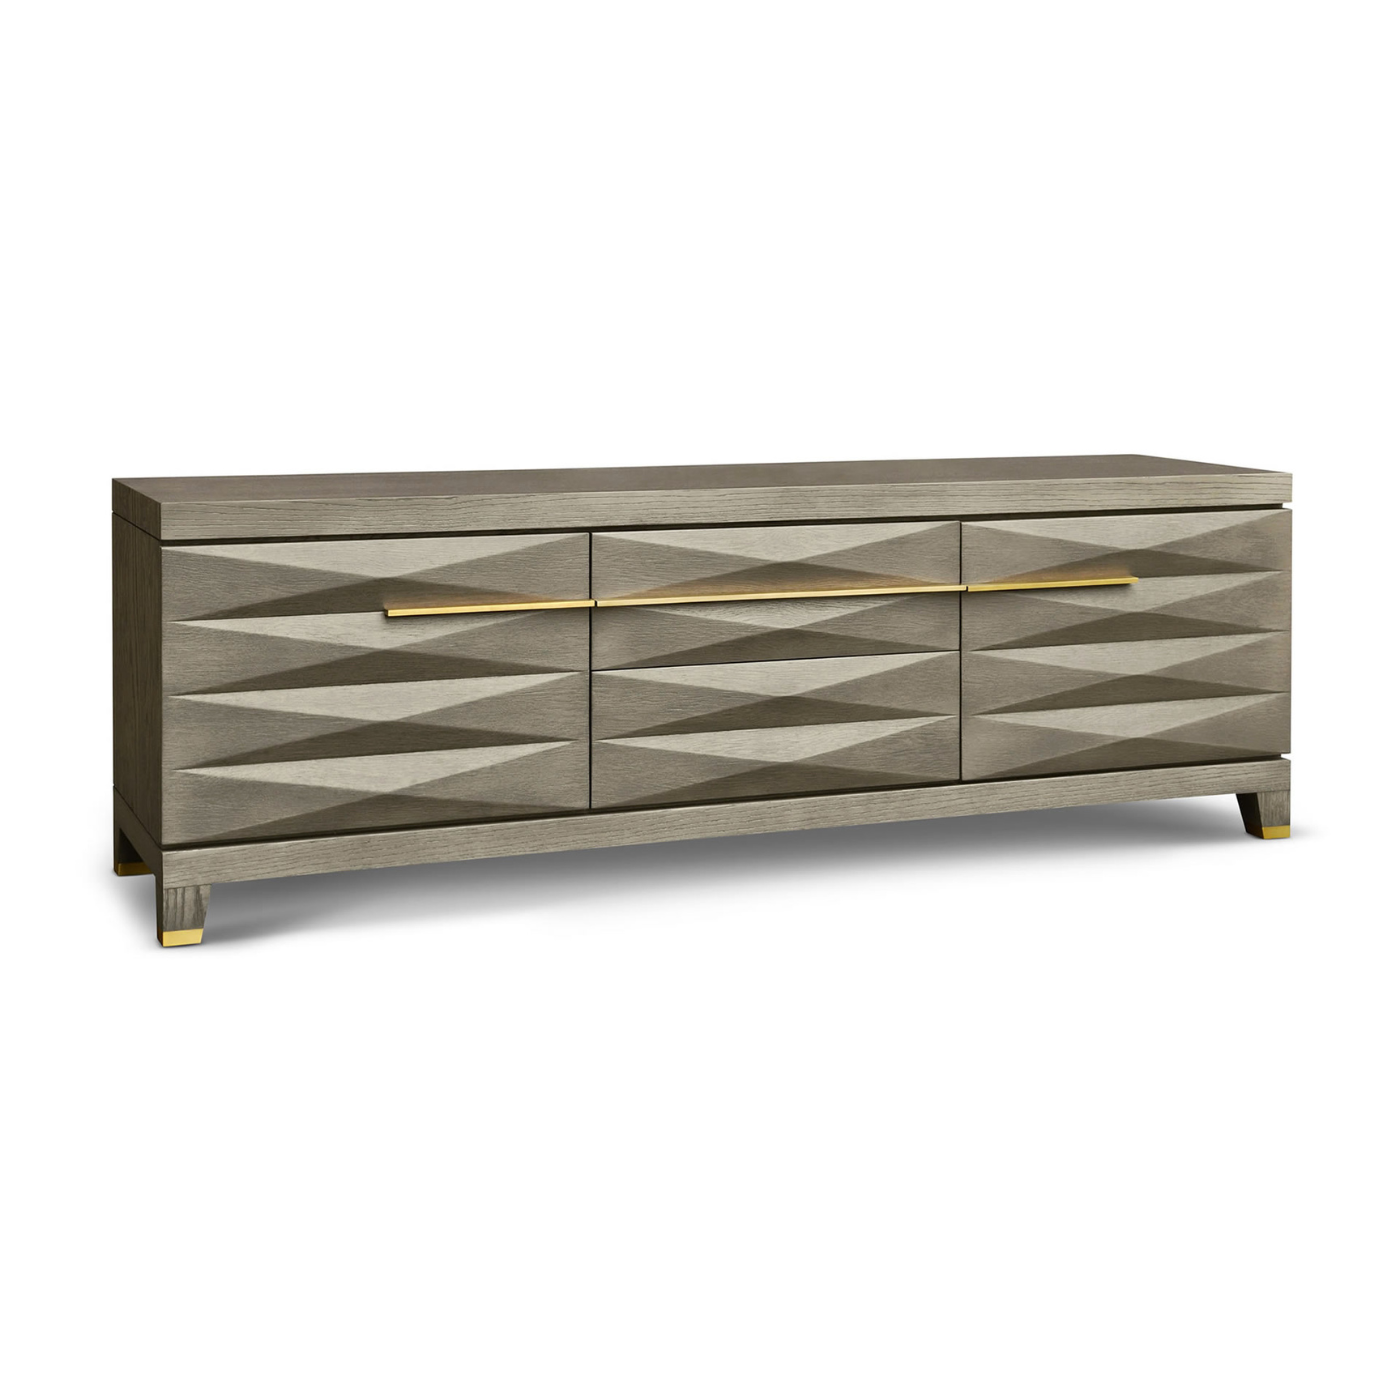 Cassis Media Unit with Gold Handles by Berkeley Designs - Maison Rêves UK